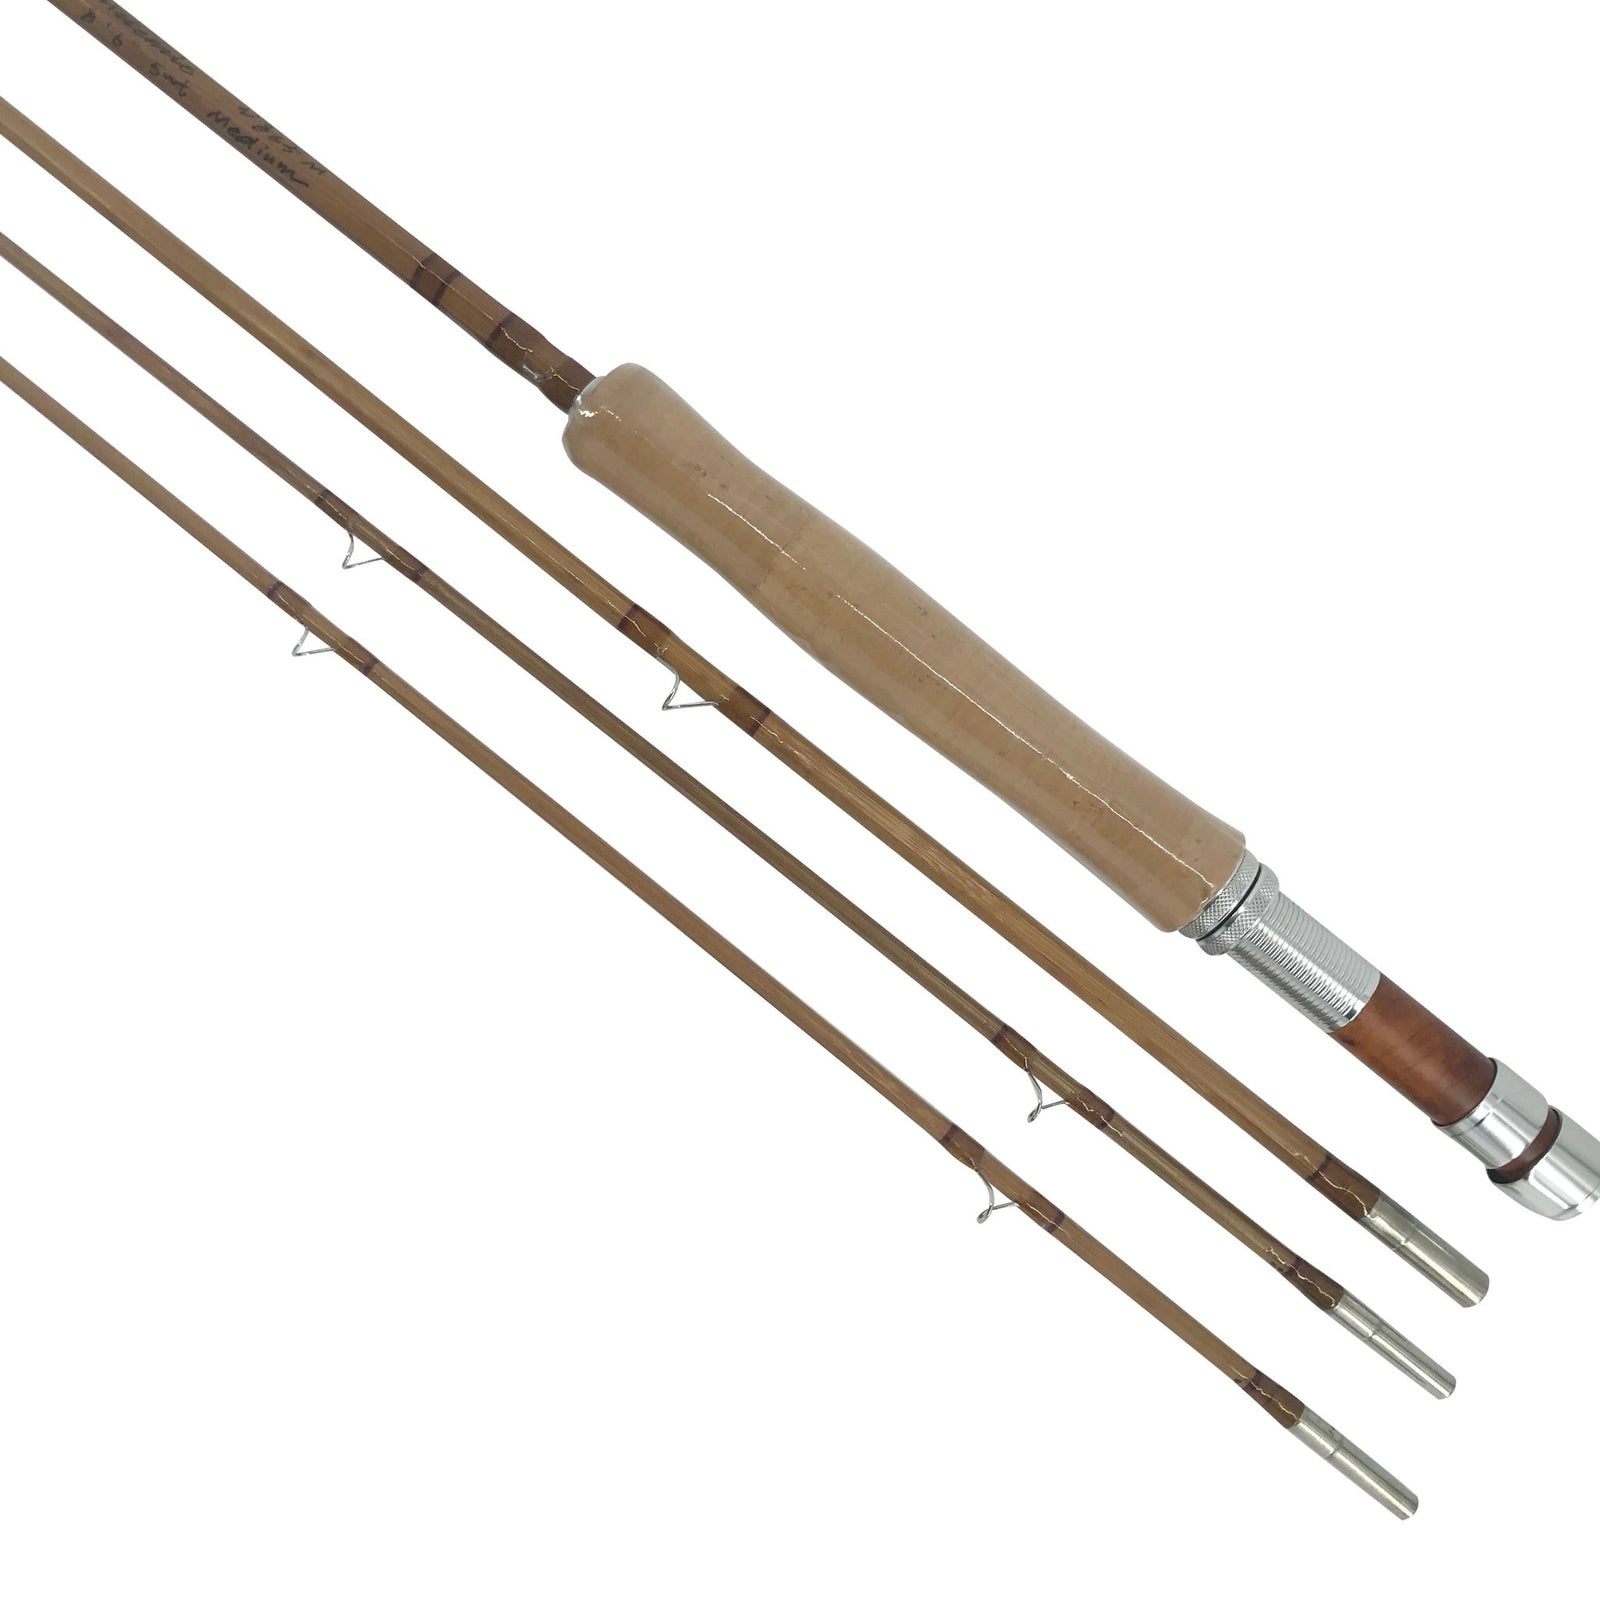 Large Water Bamboo Fly Rods - Headwaters Bamboo